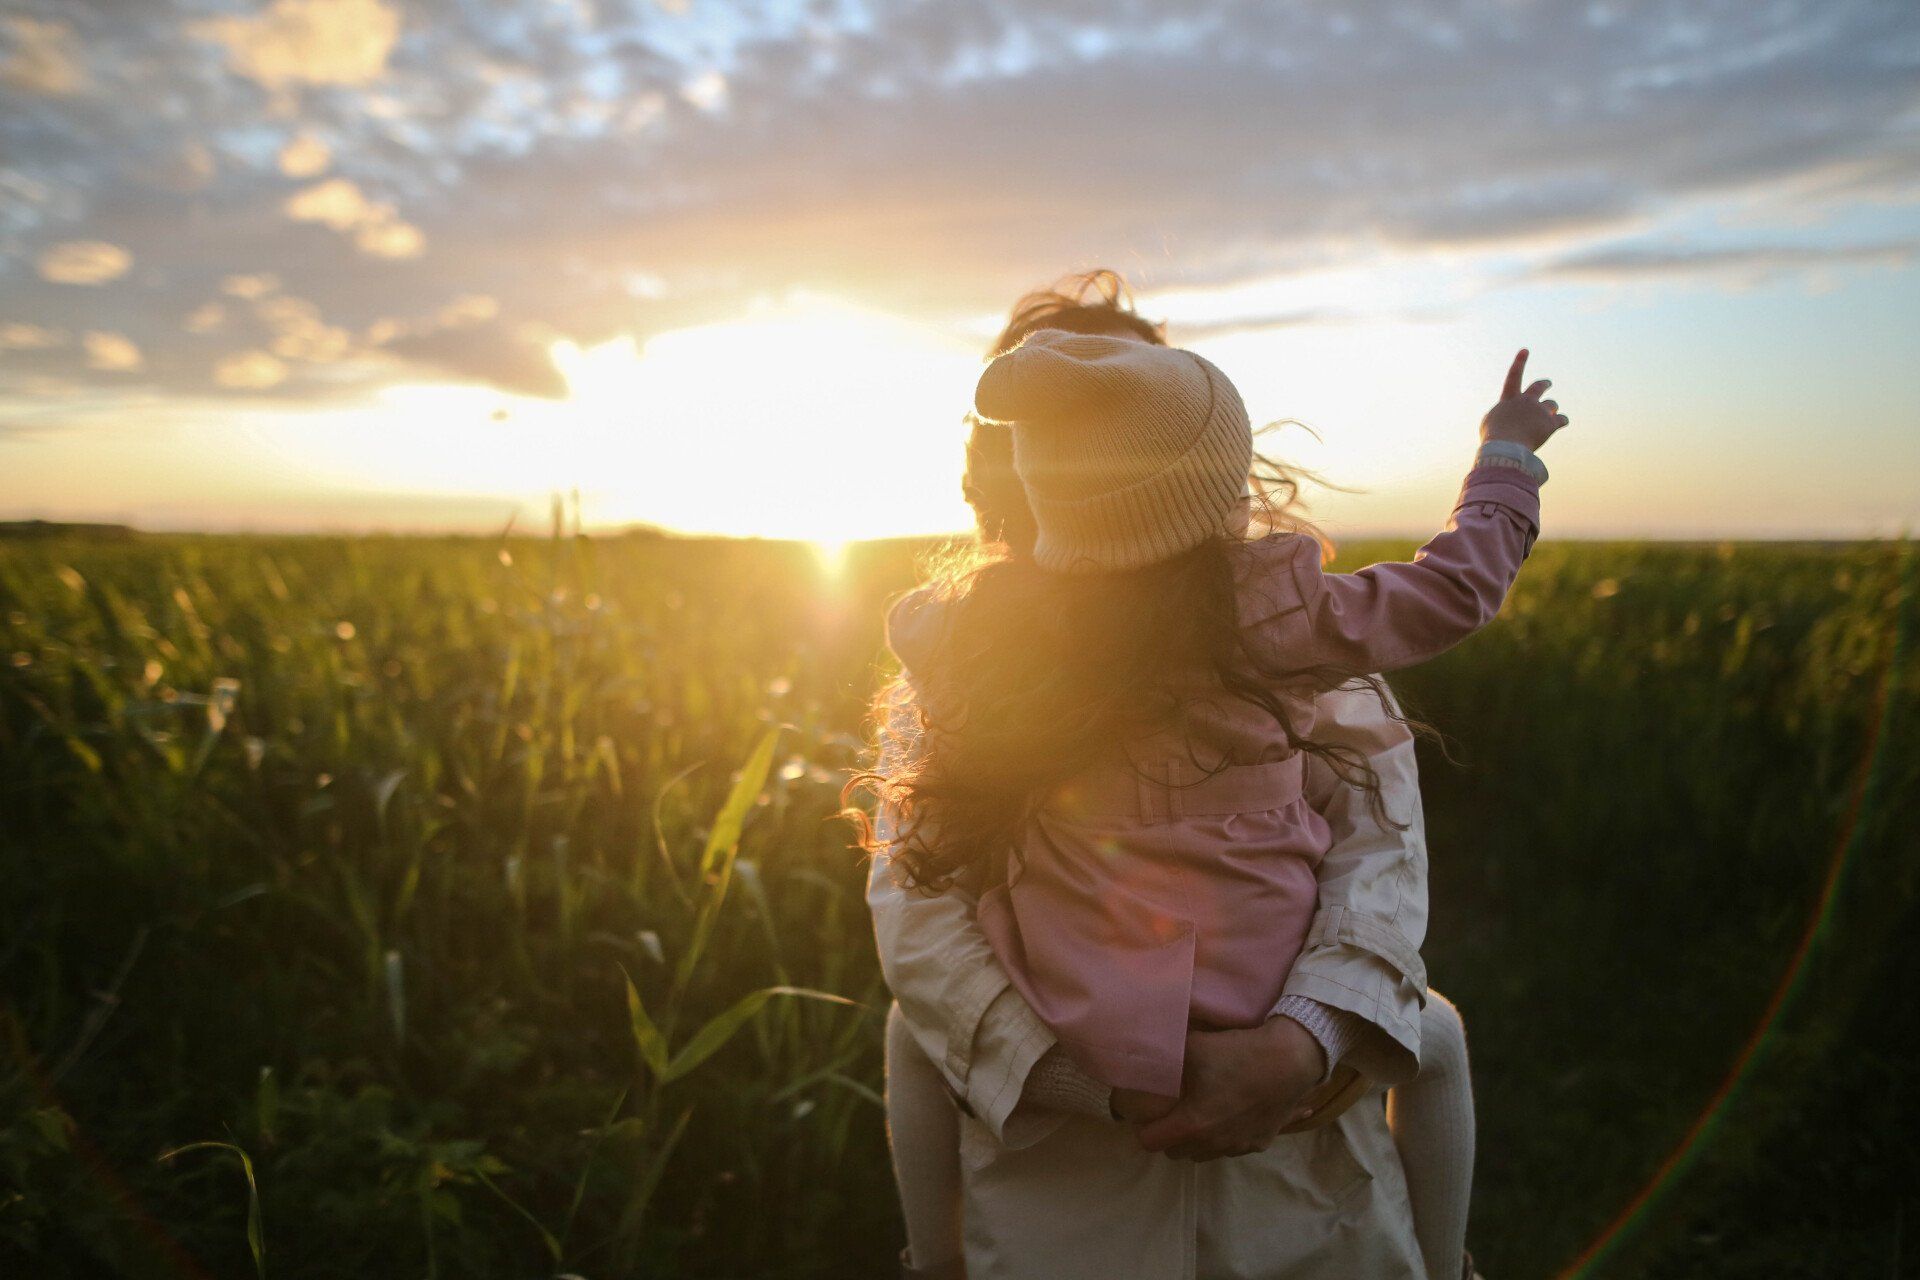 a woman is carrying a little girl on her shoulders in a field at sunset .